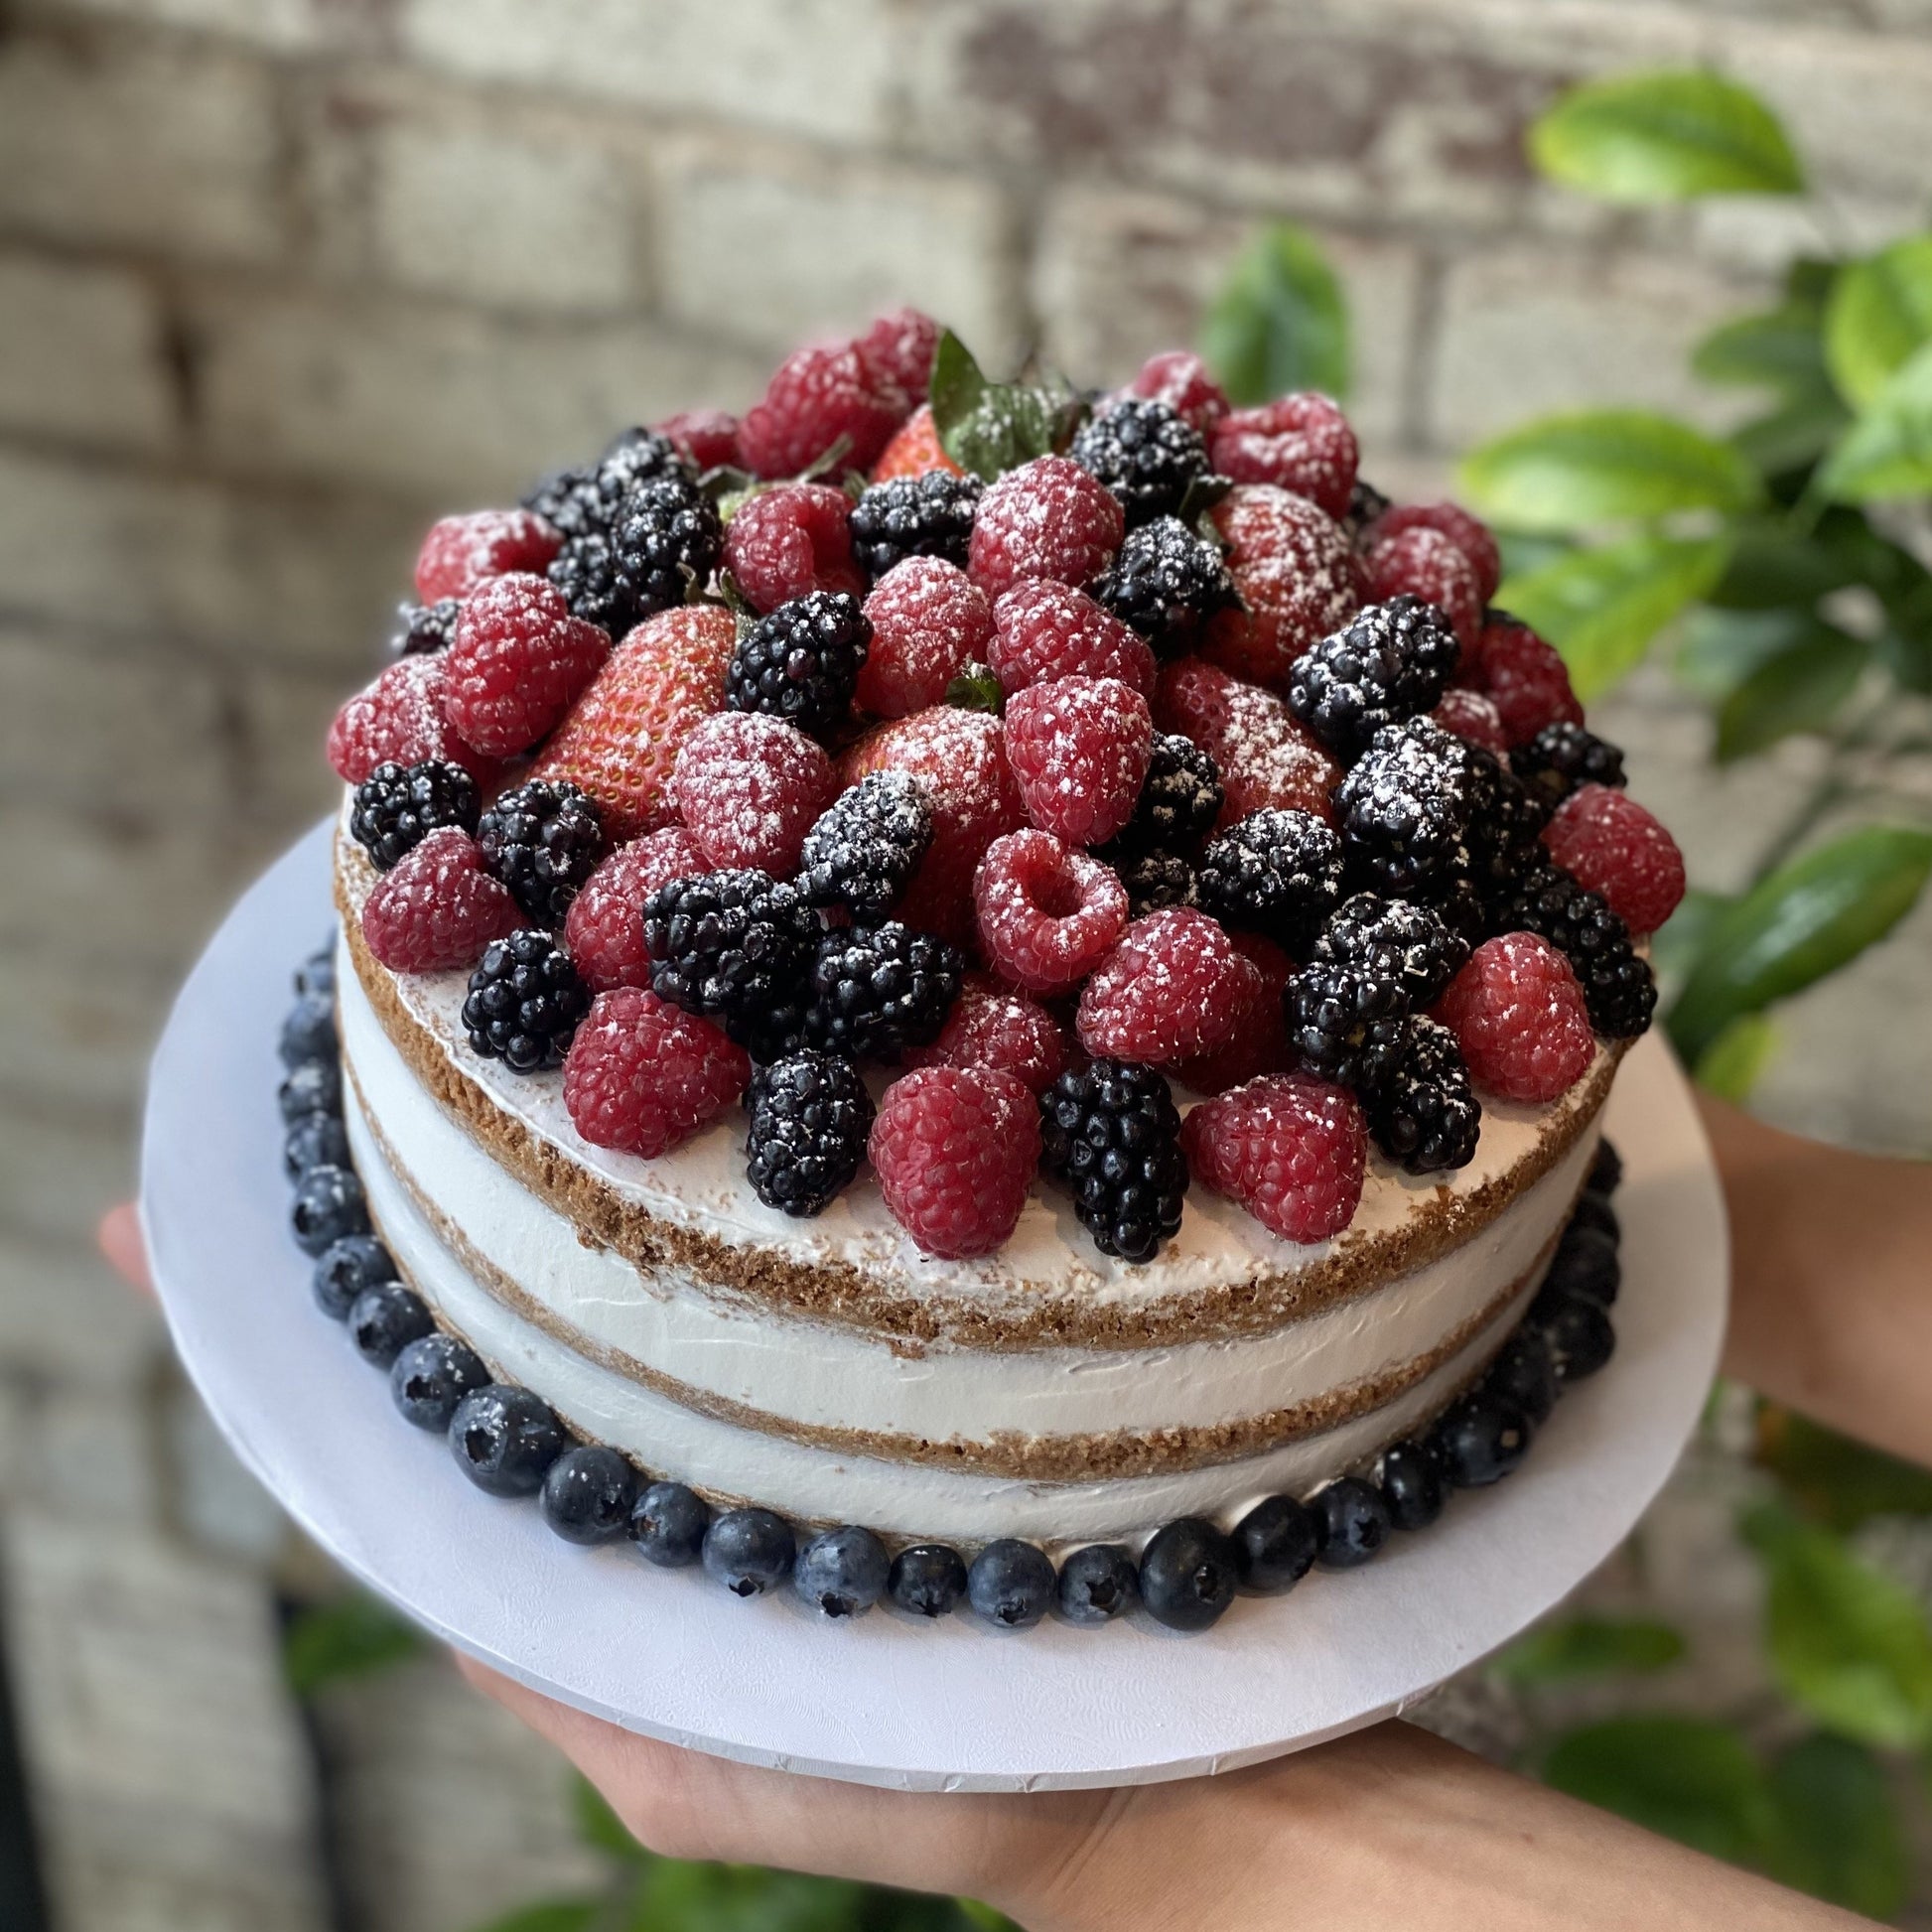 Cake with berries and powdered sugar on top